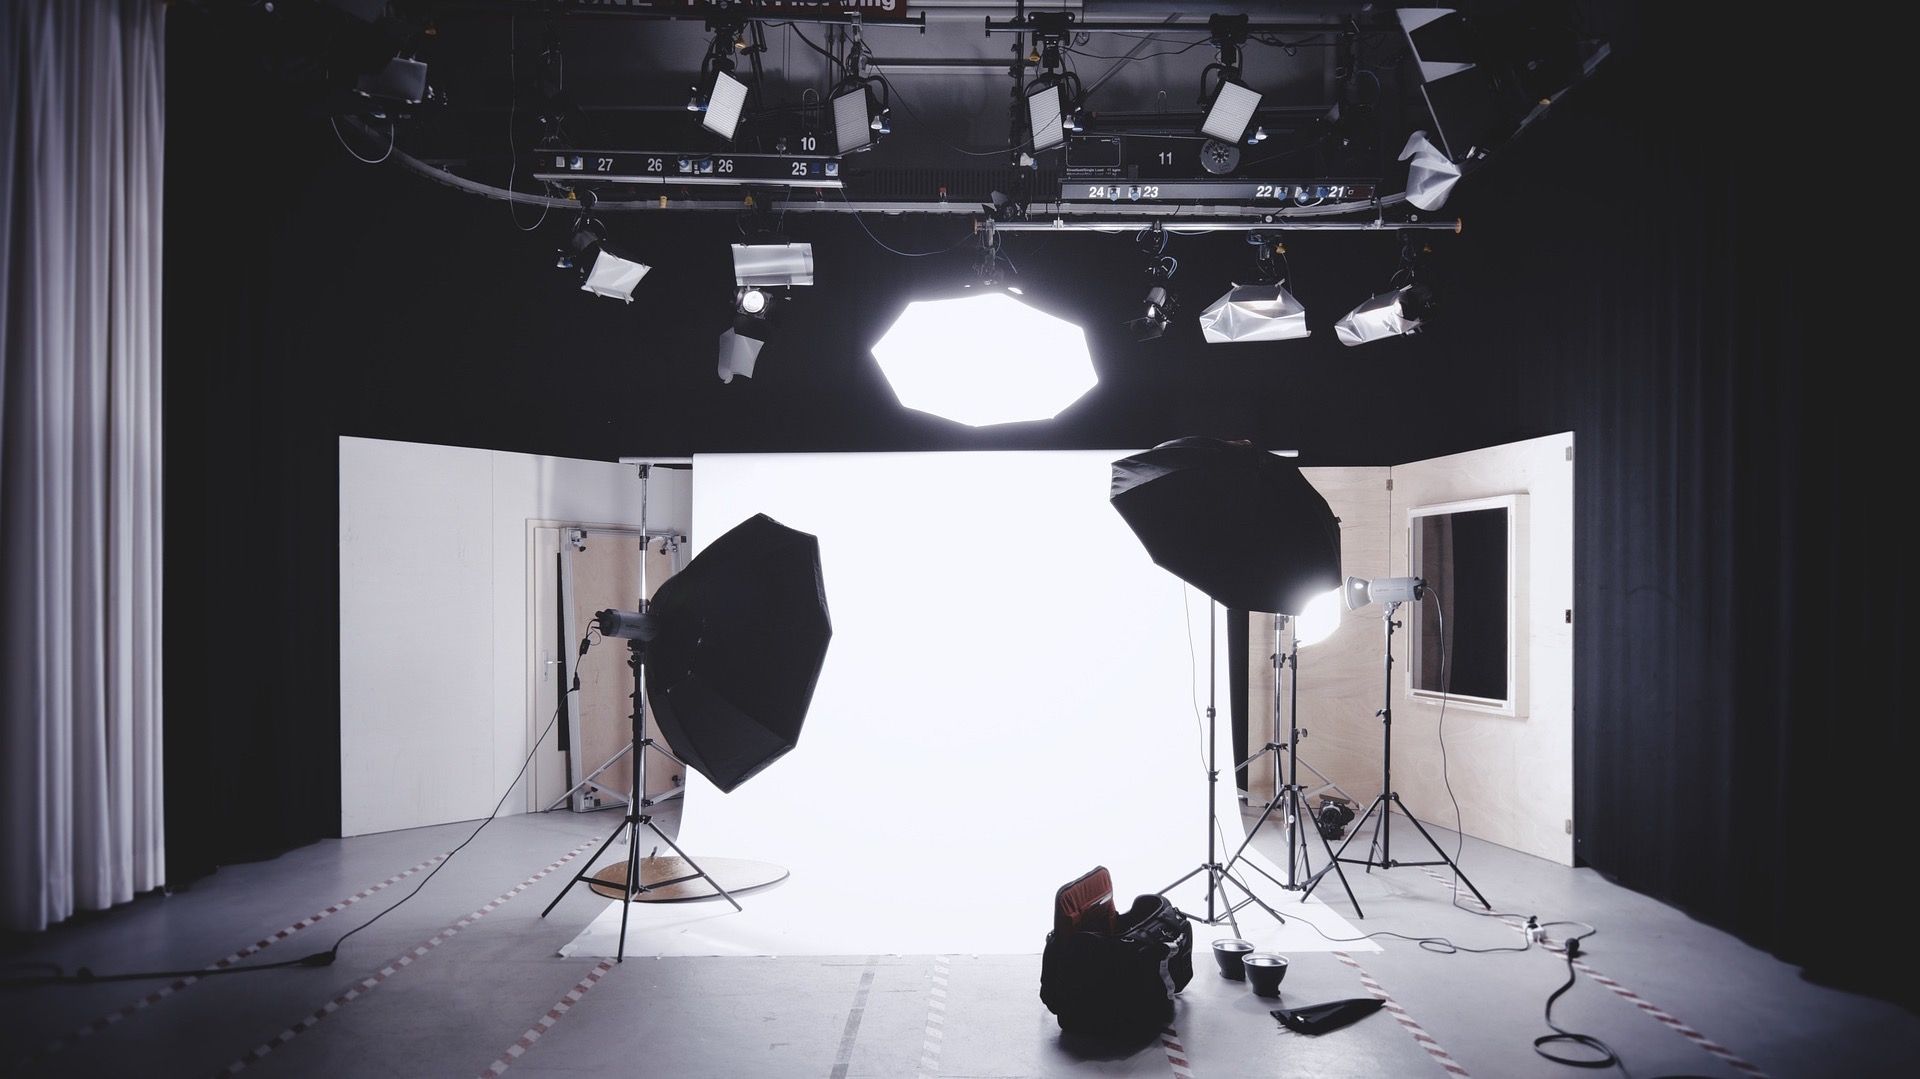 A photo studio with a backdrop and lighting